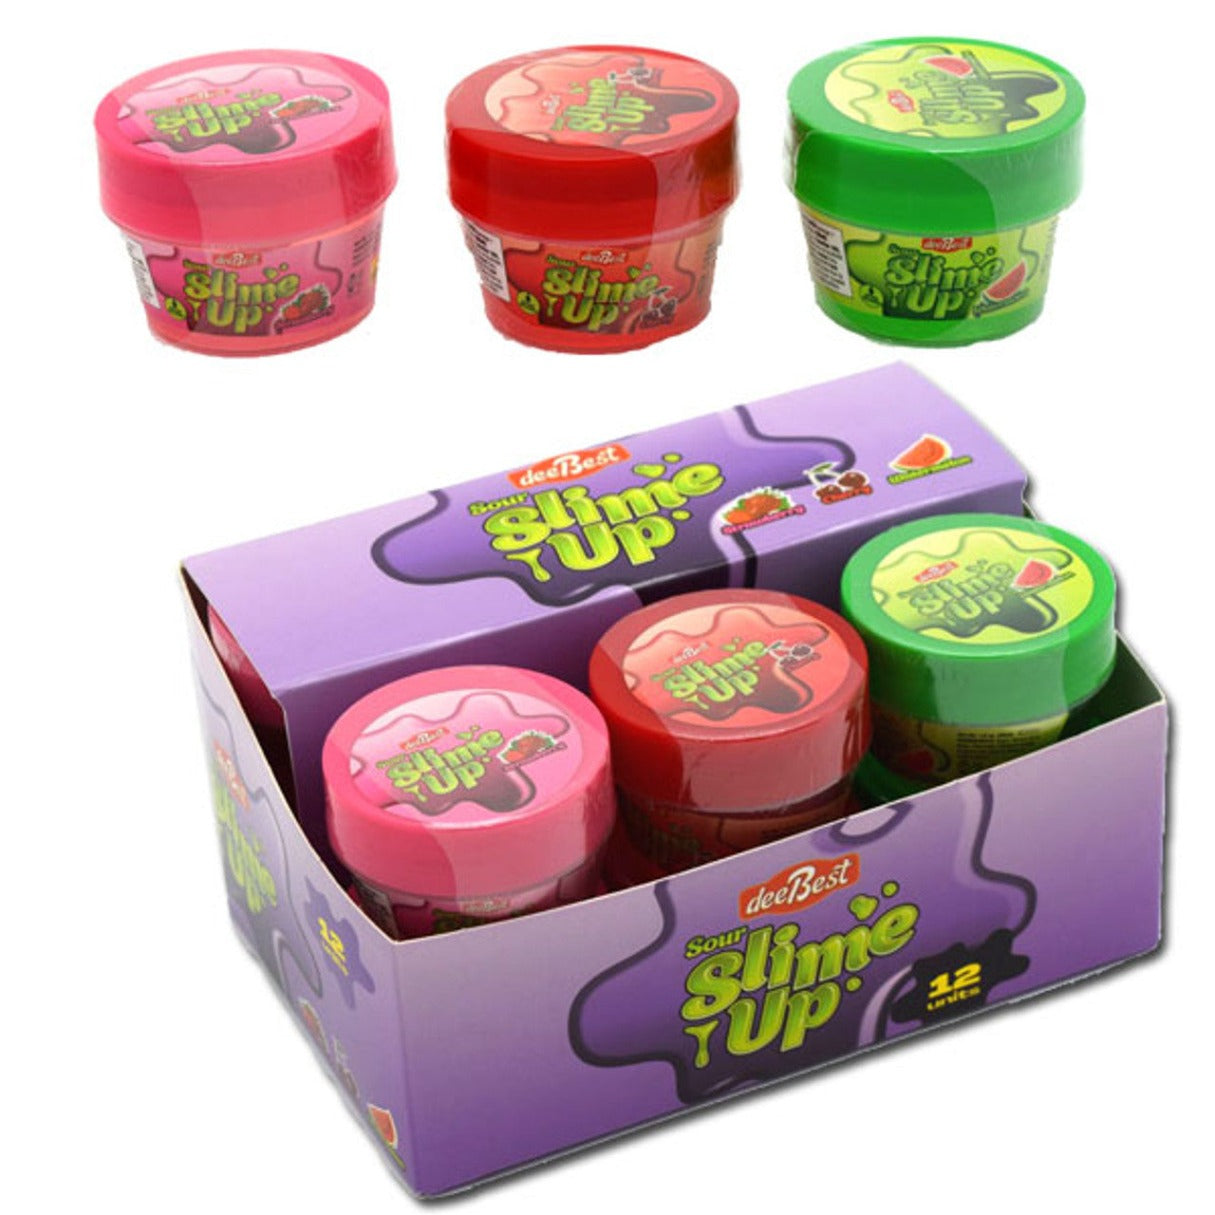 Dee Best Slime Up Candy 1.6oz - 12ct